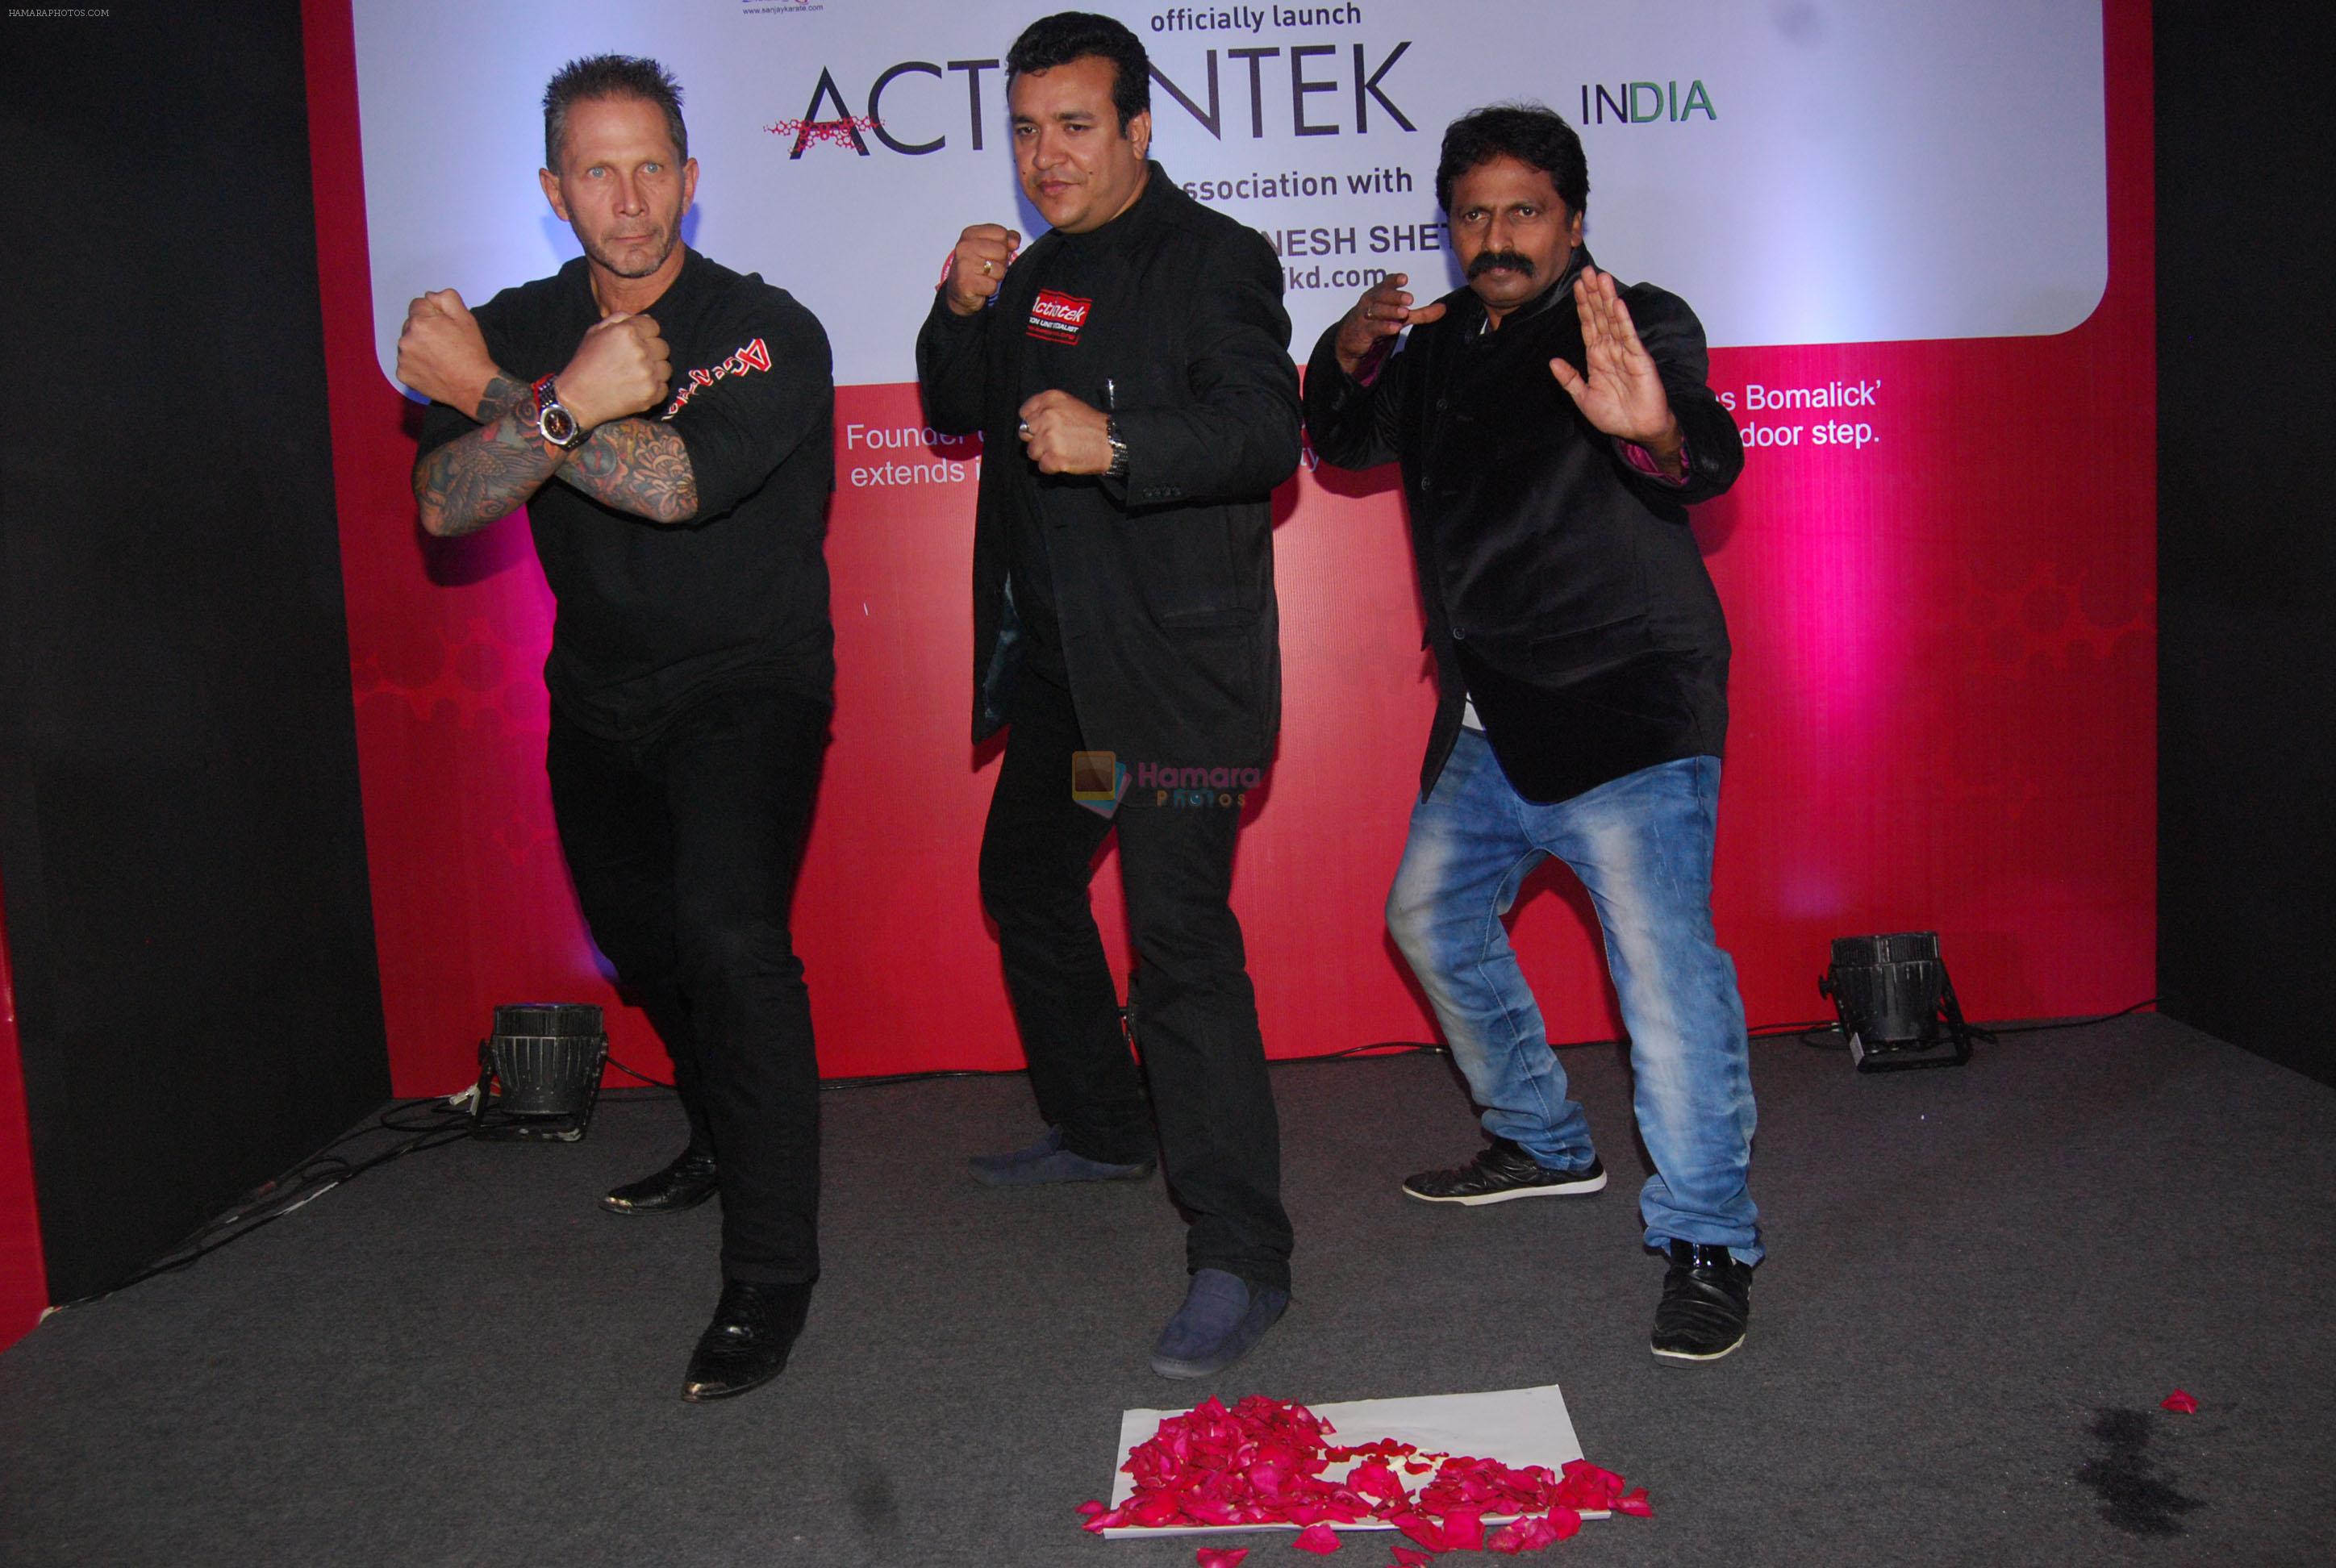 James & Chitah Y Shetty with Sanjay Gokal in stunt mood at the launch of Hollywood Action Unit ACTIONTEK INDIA in Novatel, Juhu, Mumbai on 17th Nov 2012